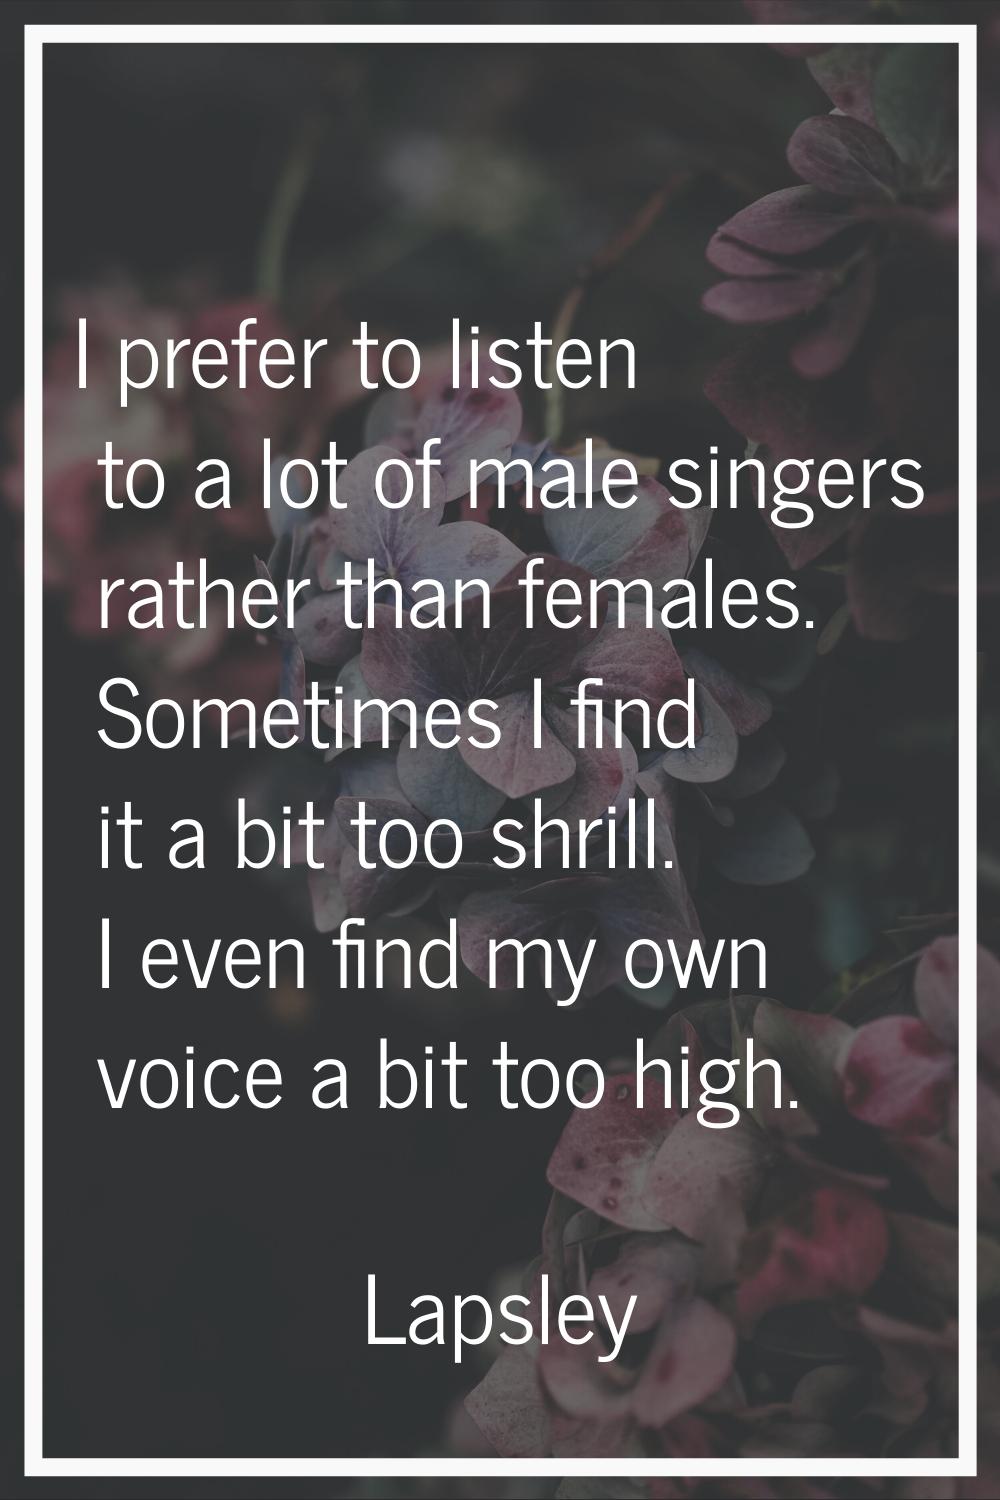 I prefer to listen to a lot of male singers rather than females. Sometimes I find it a bit too shri